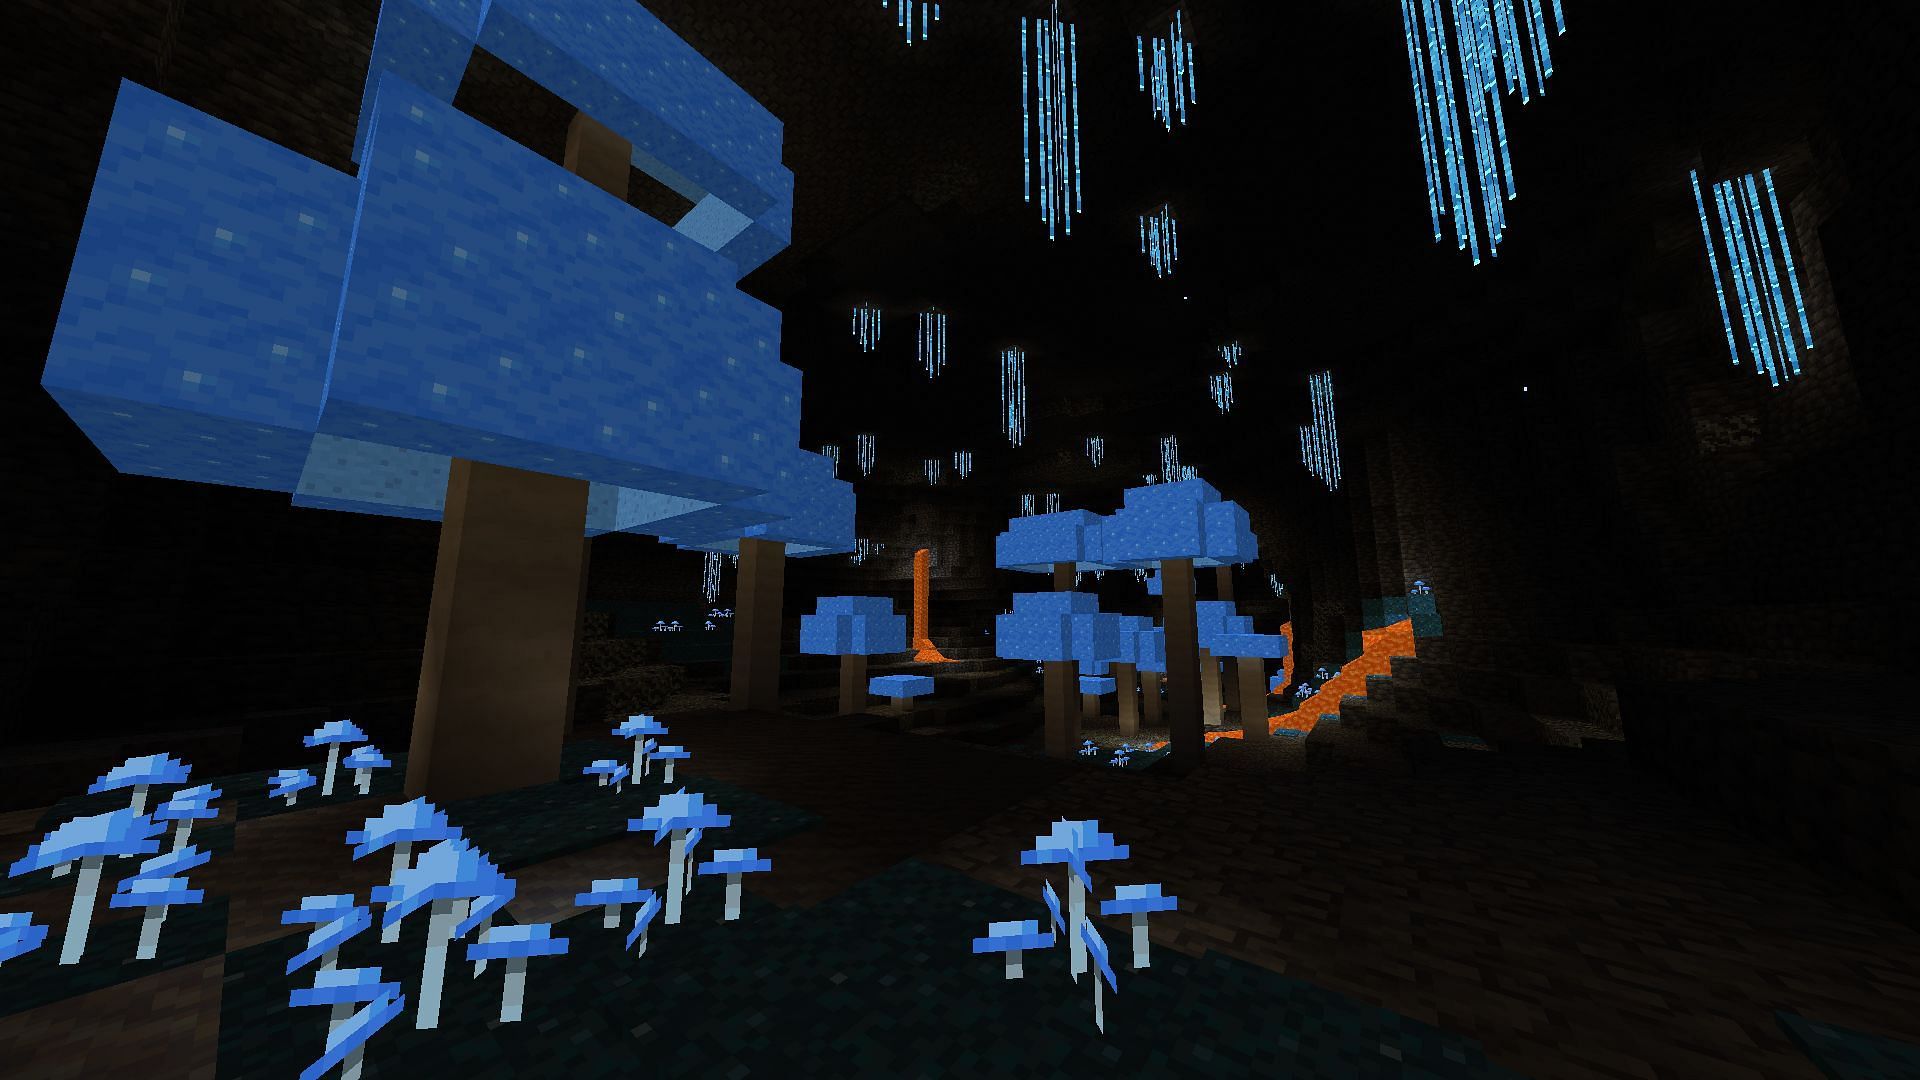 A glowing grotto biome in the Biomes O